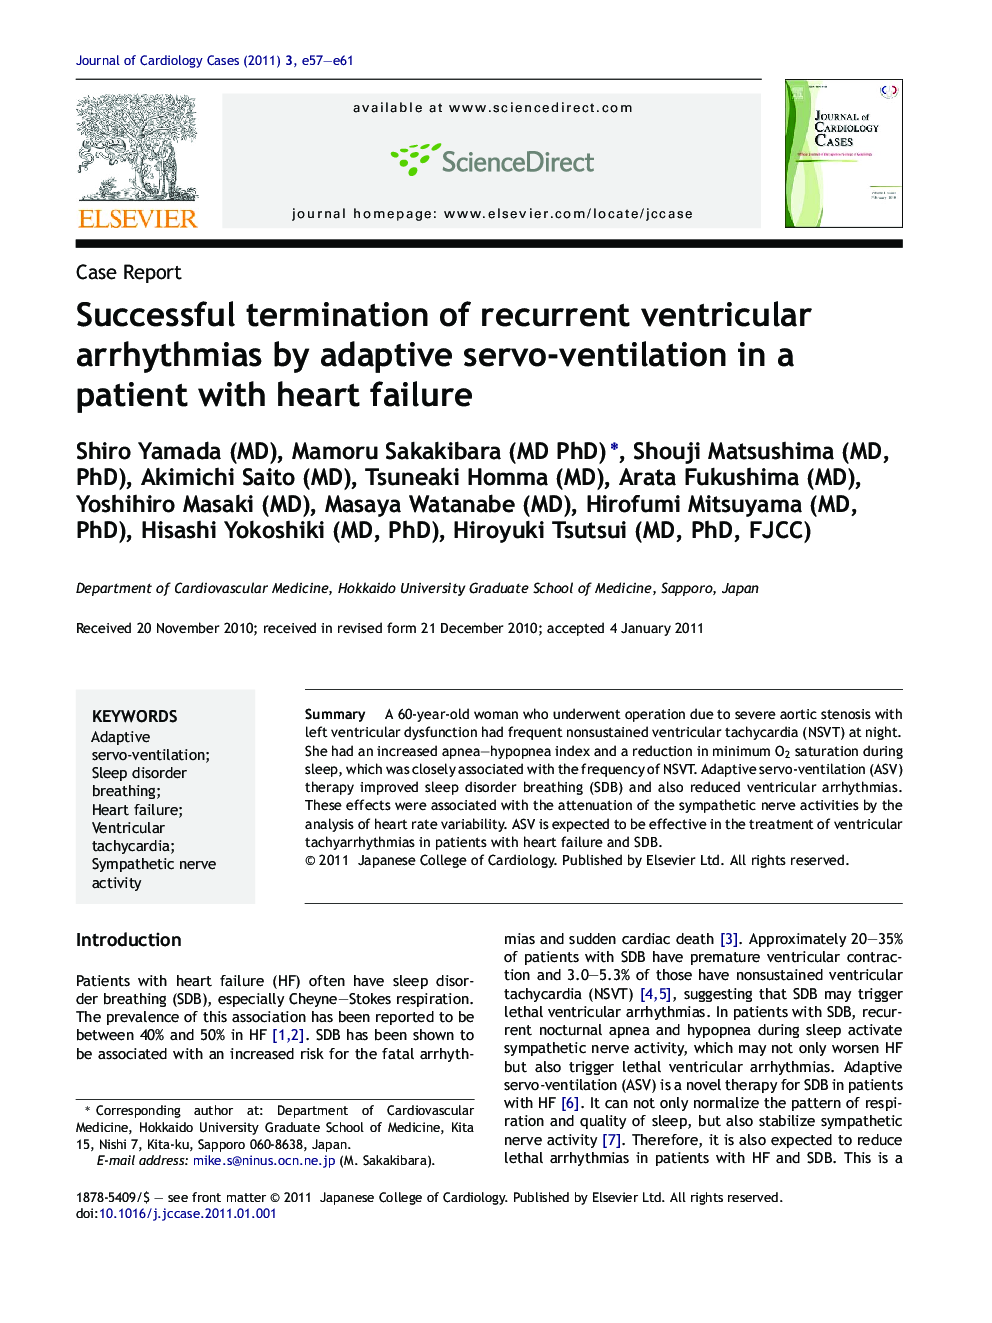 Successful termination of recurrent ventricular arrhythmias by adaptive servo-ventilation in a patient with heart failure